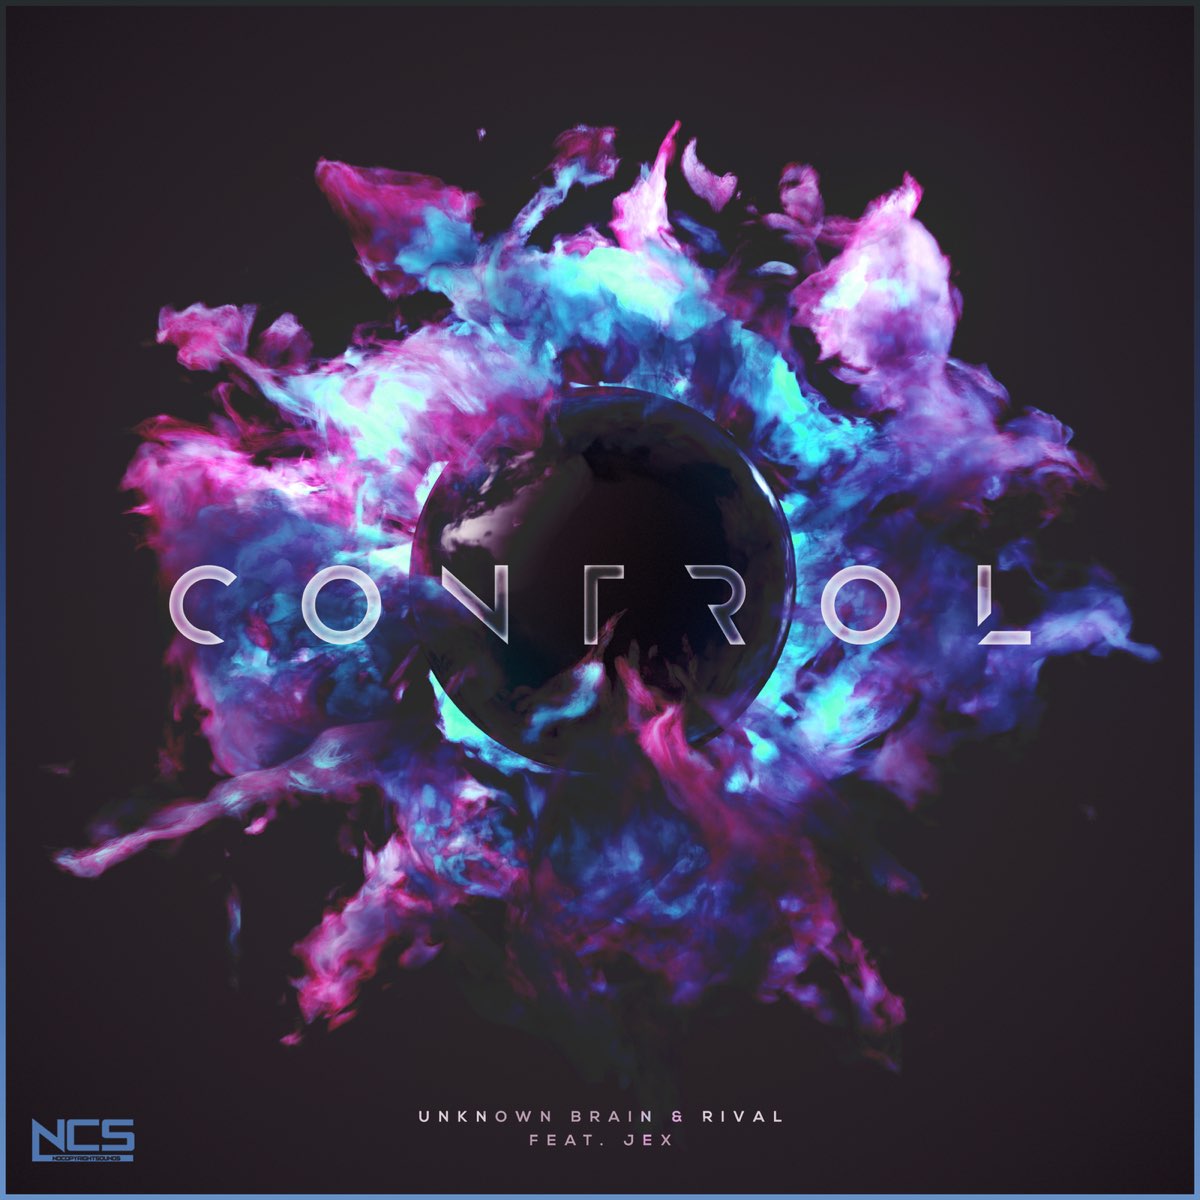 Unknown brain feat. Control Brain and Rival. Control Unknown Brain x Rival feat. Jex. Unknown Brain. NCS обложки.